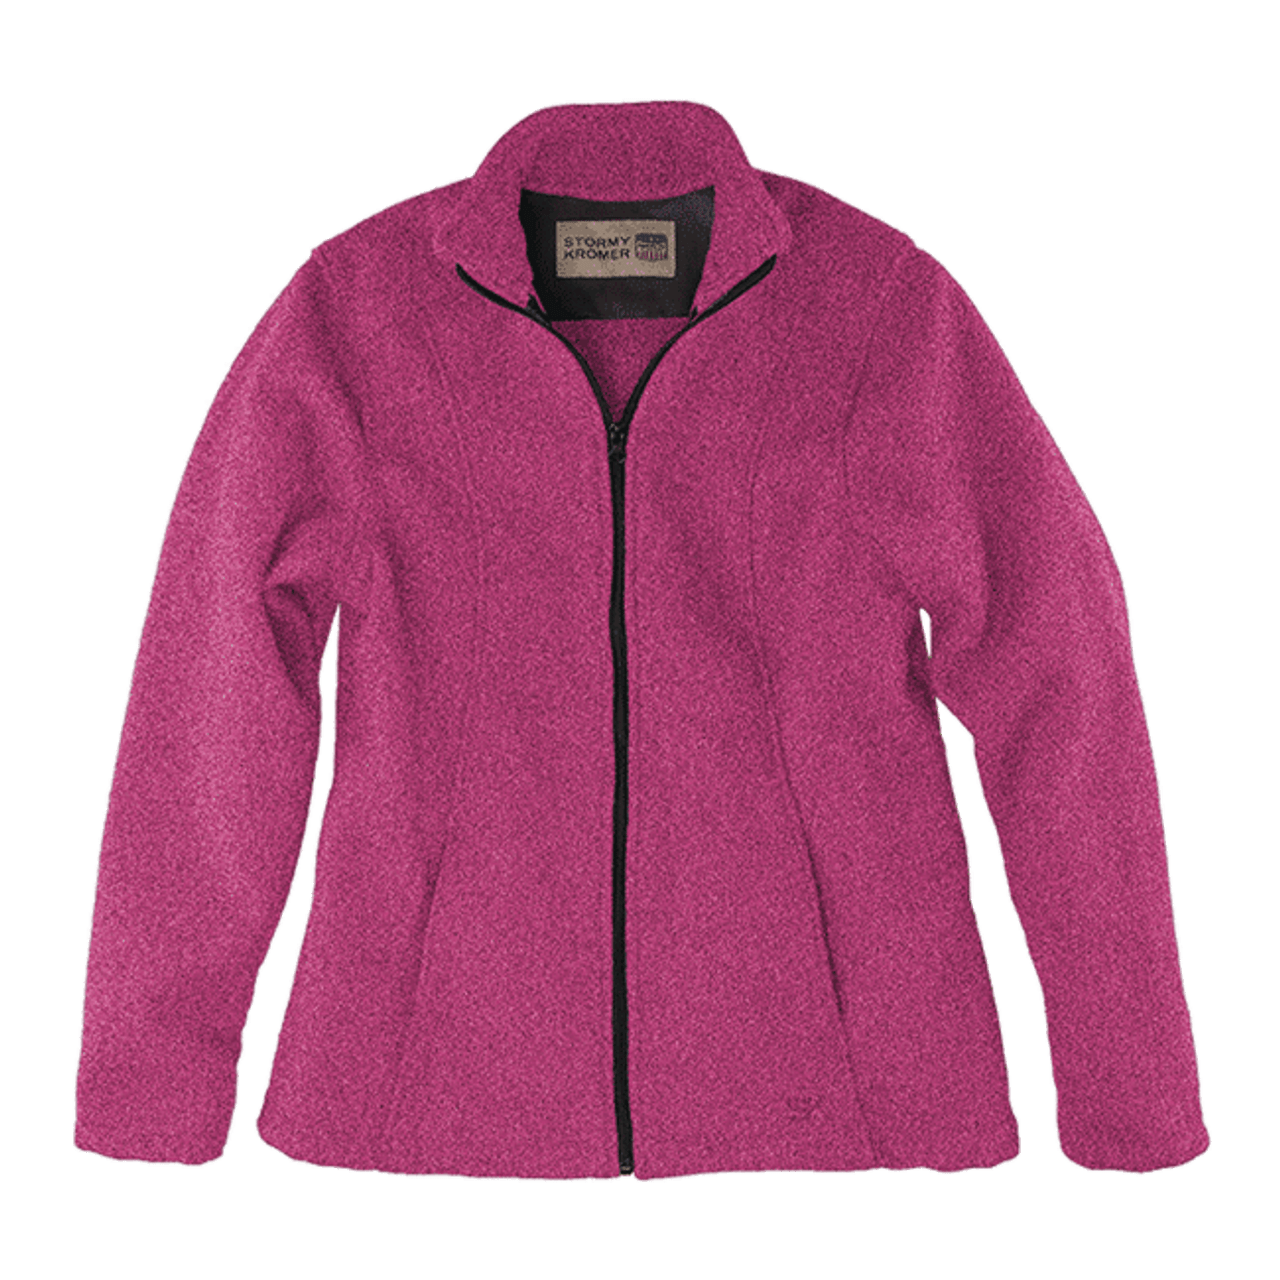 The Woolover Full Zip for Her